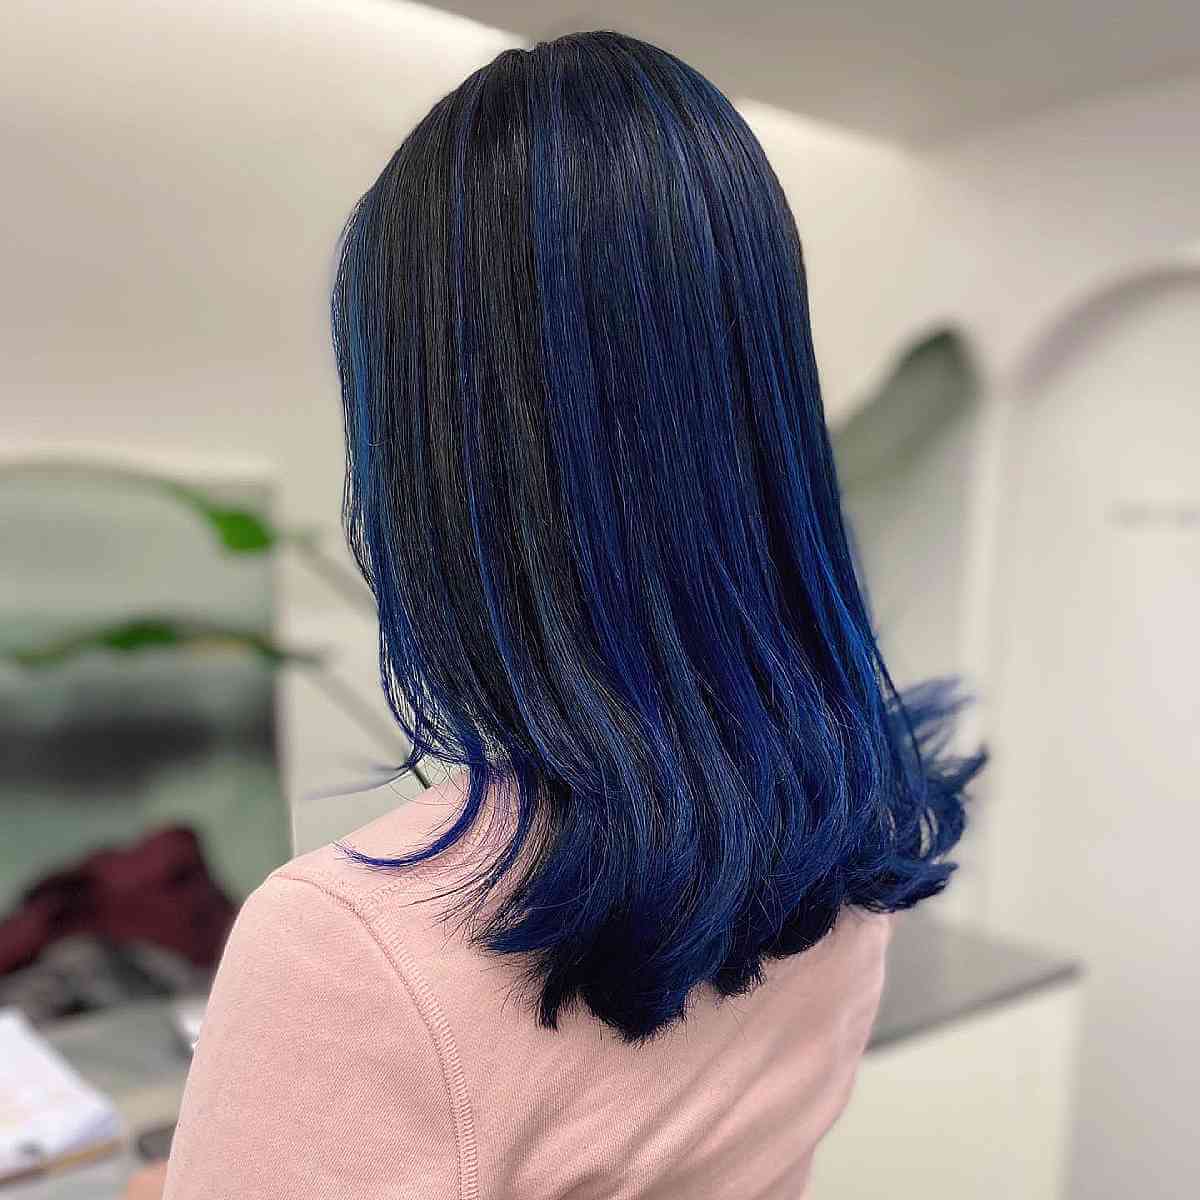 Dark Blue Hair - How to Get This Darker Hair Color in 2023